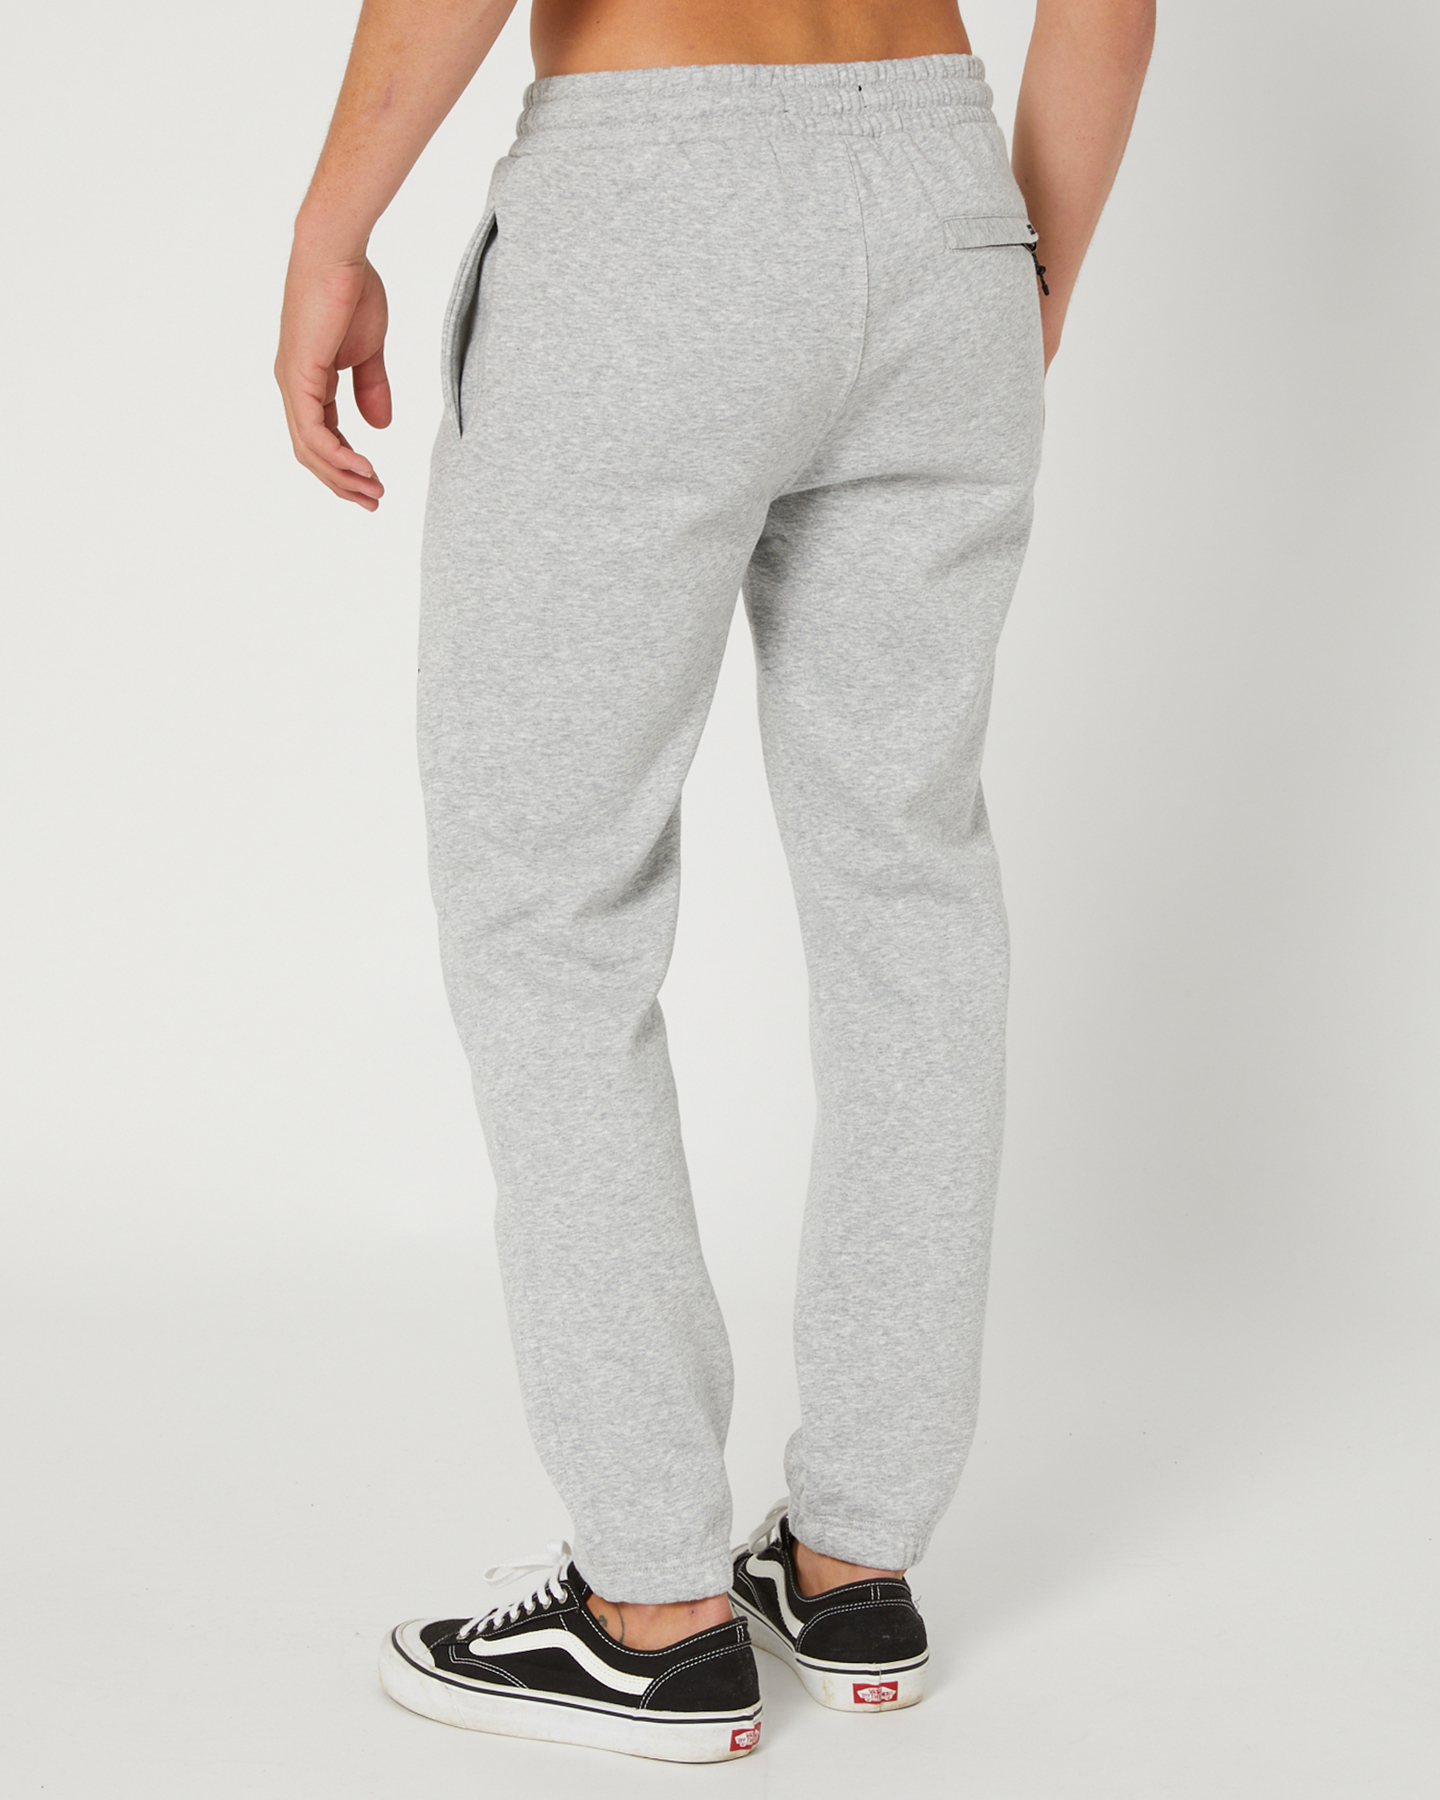 Rip Curl Search Icon Mens Track Pant - Grey Marle | SurfStitch